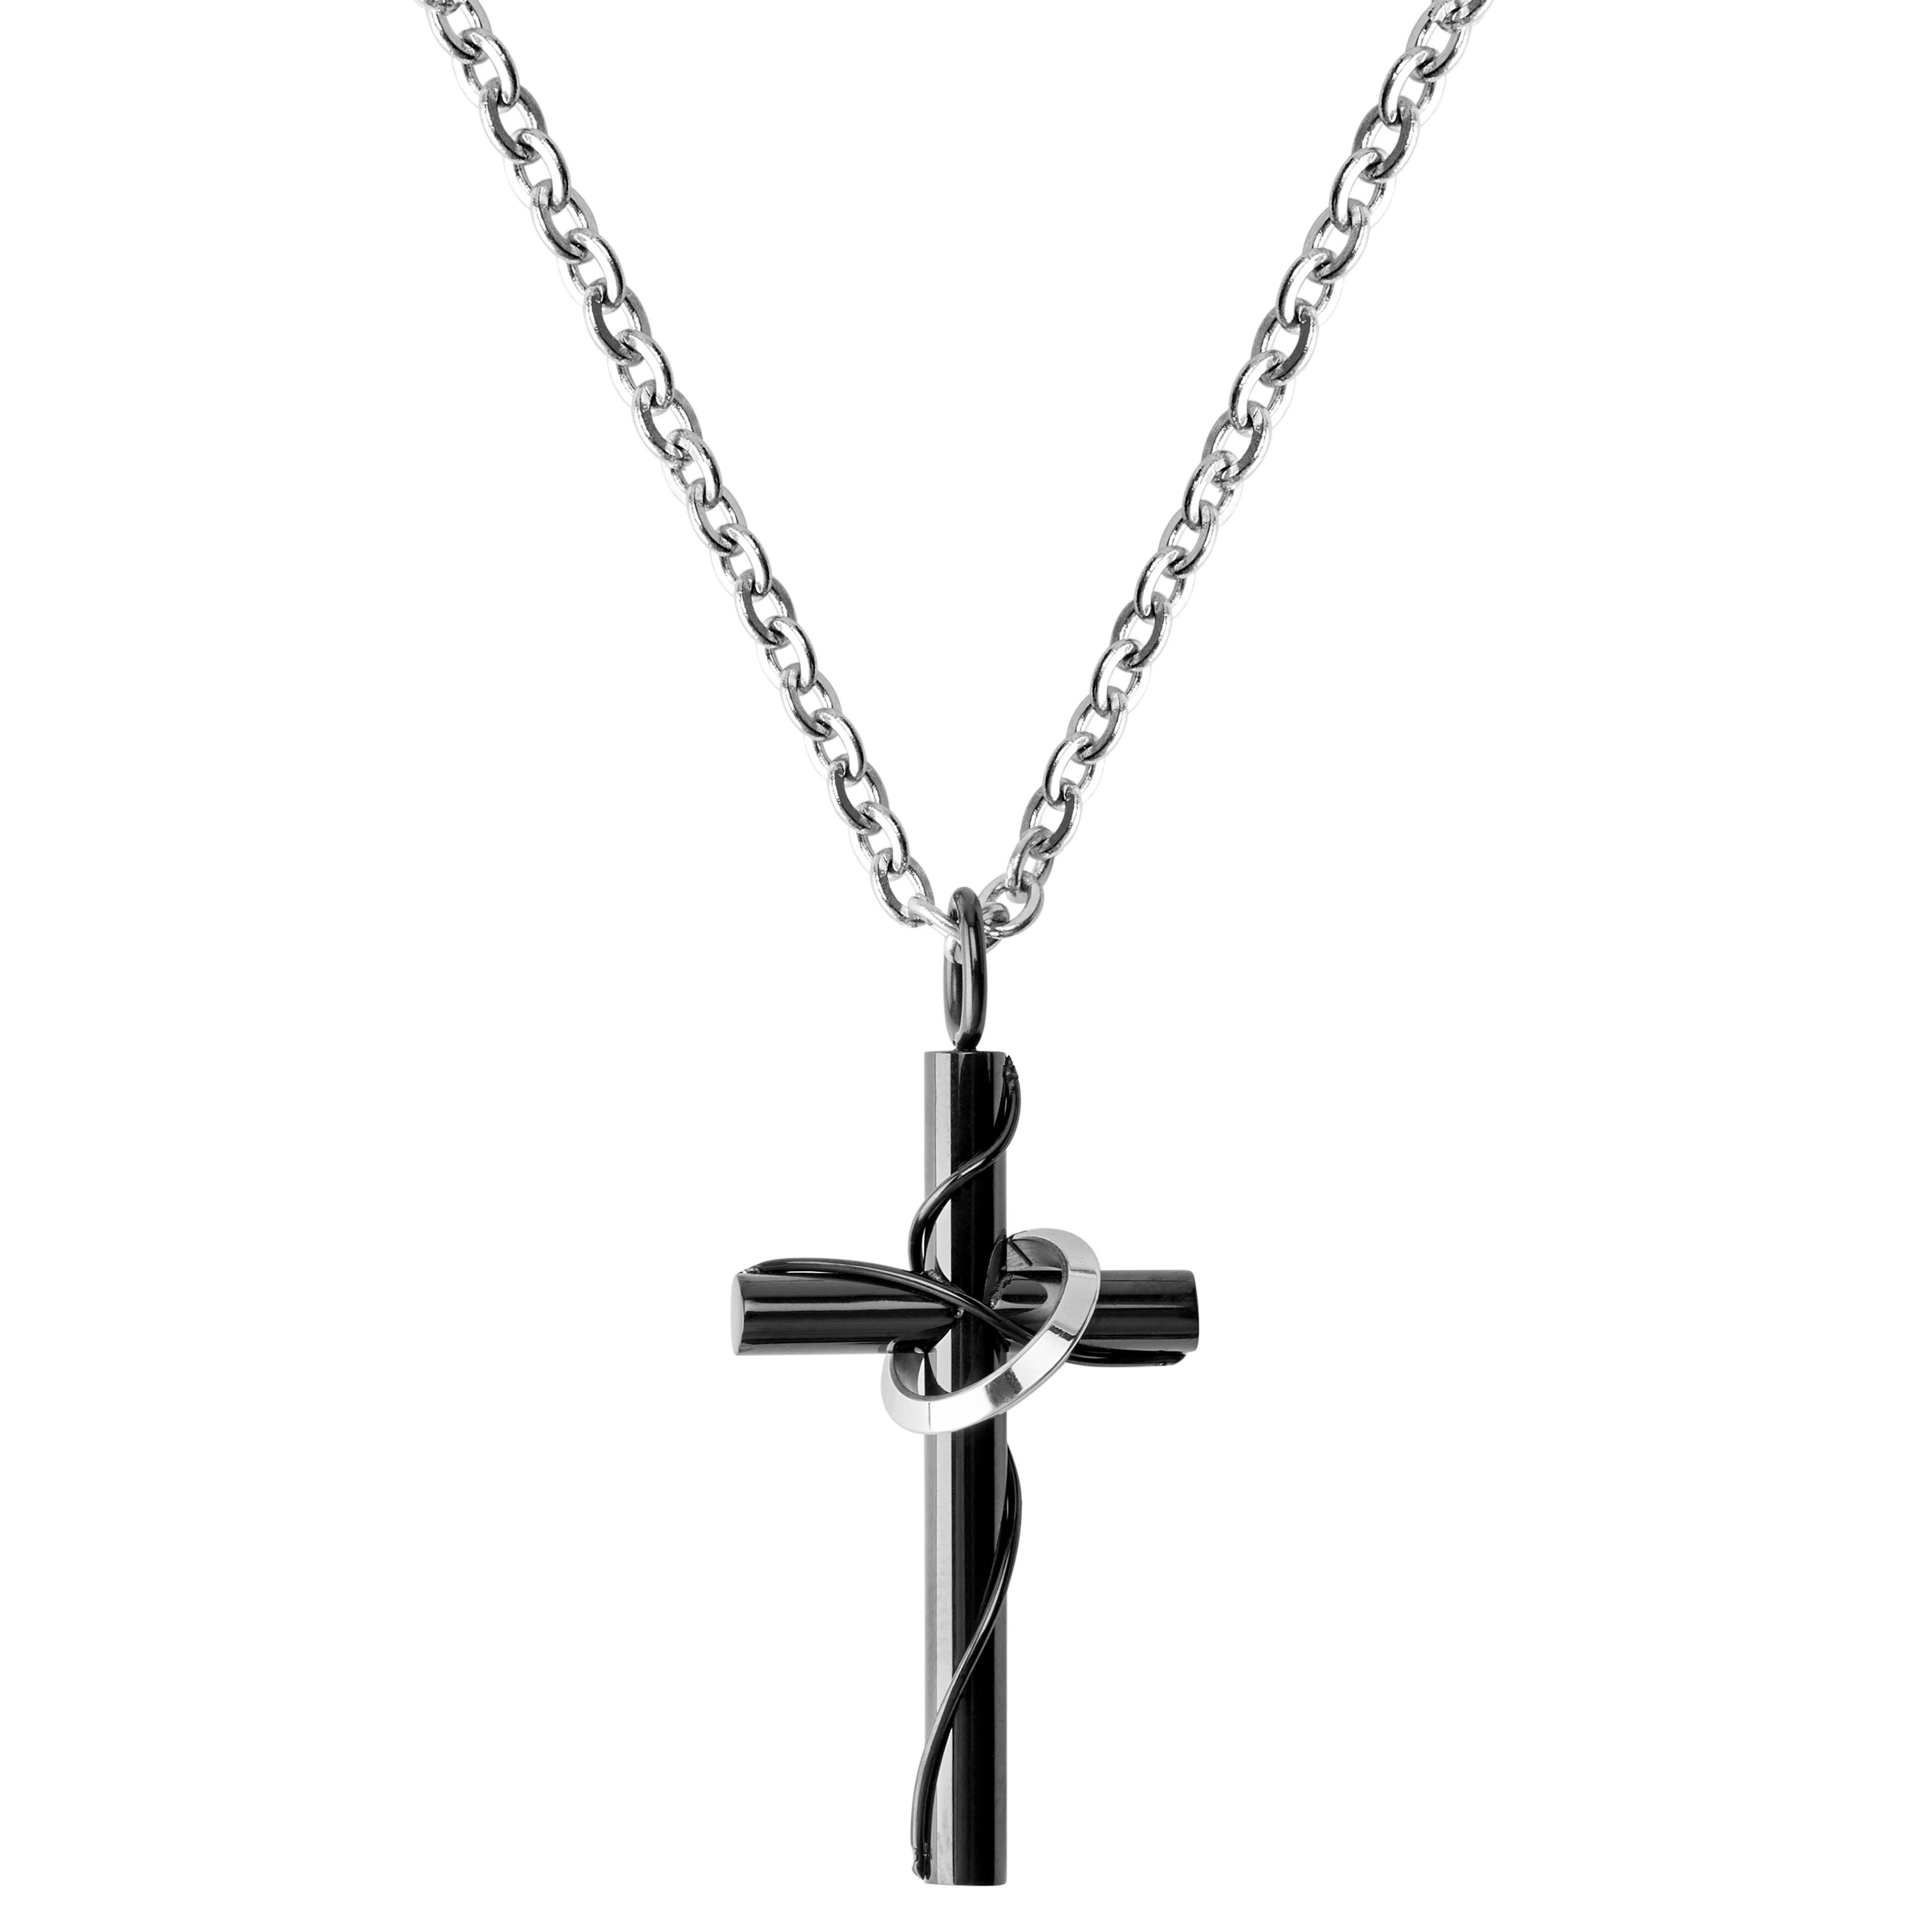 Silver-Tone Stainless Steel With Black Cross & Silver-Tone Halo Cable Chain Necklace